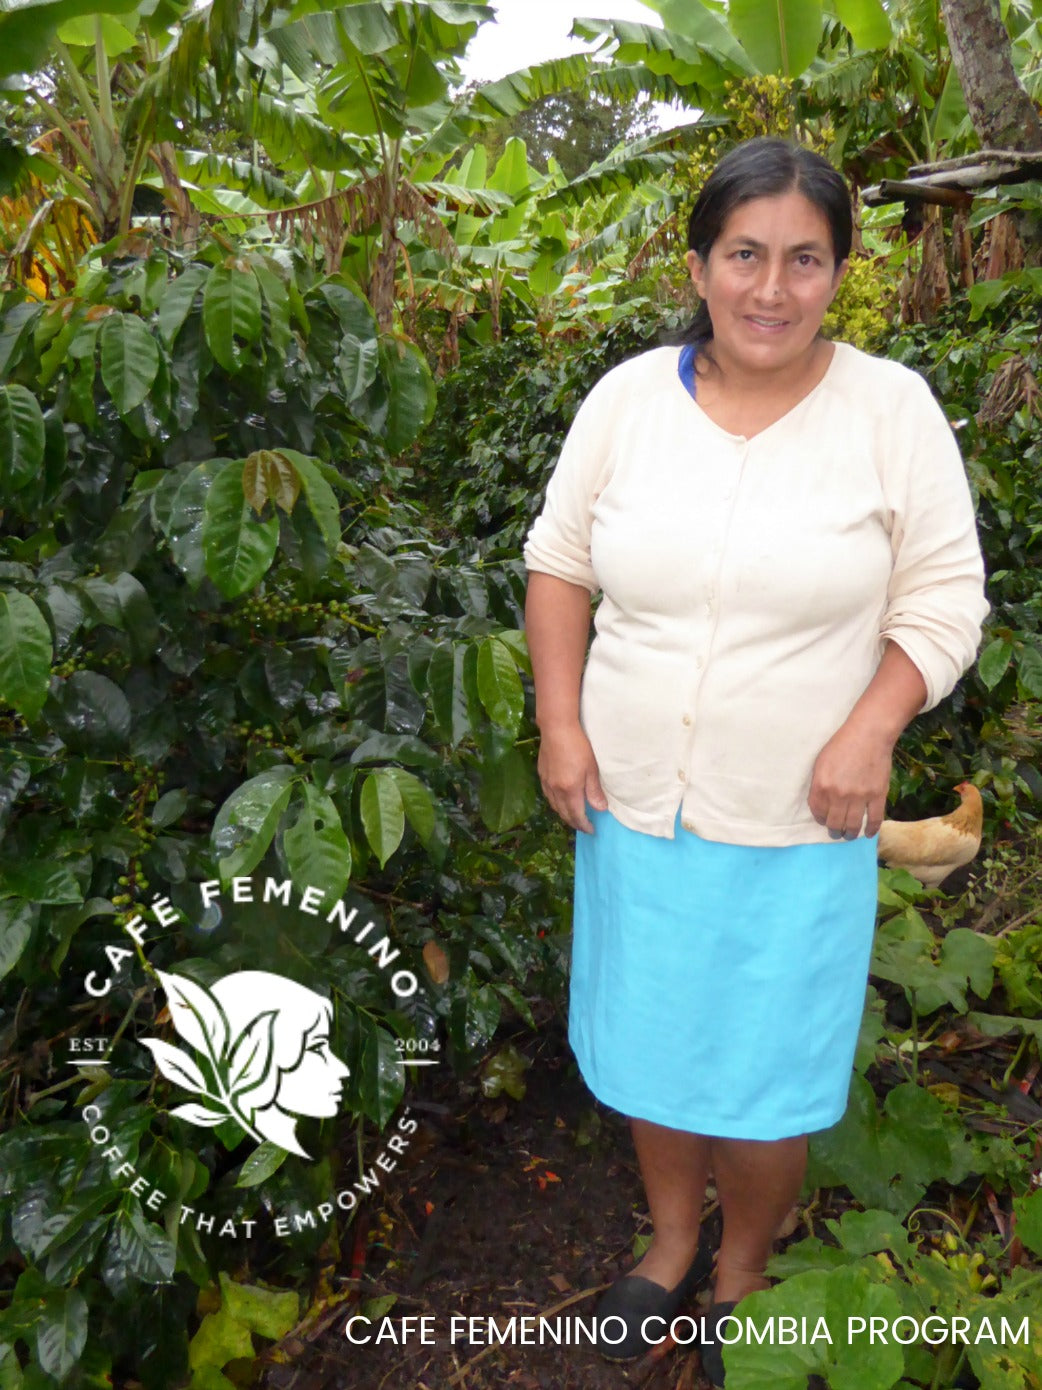 With every plant grown, the women farmers of the Café Femenino Colombia take up space in their communities, and contribute to their collective voice as women, farmers, and agents of social change.